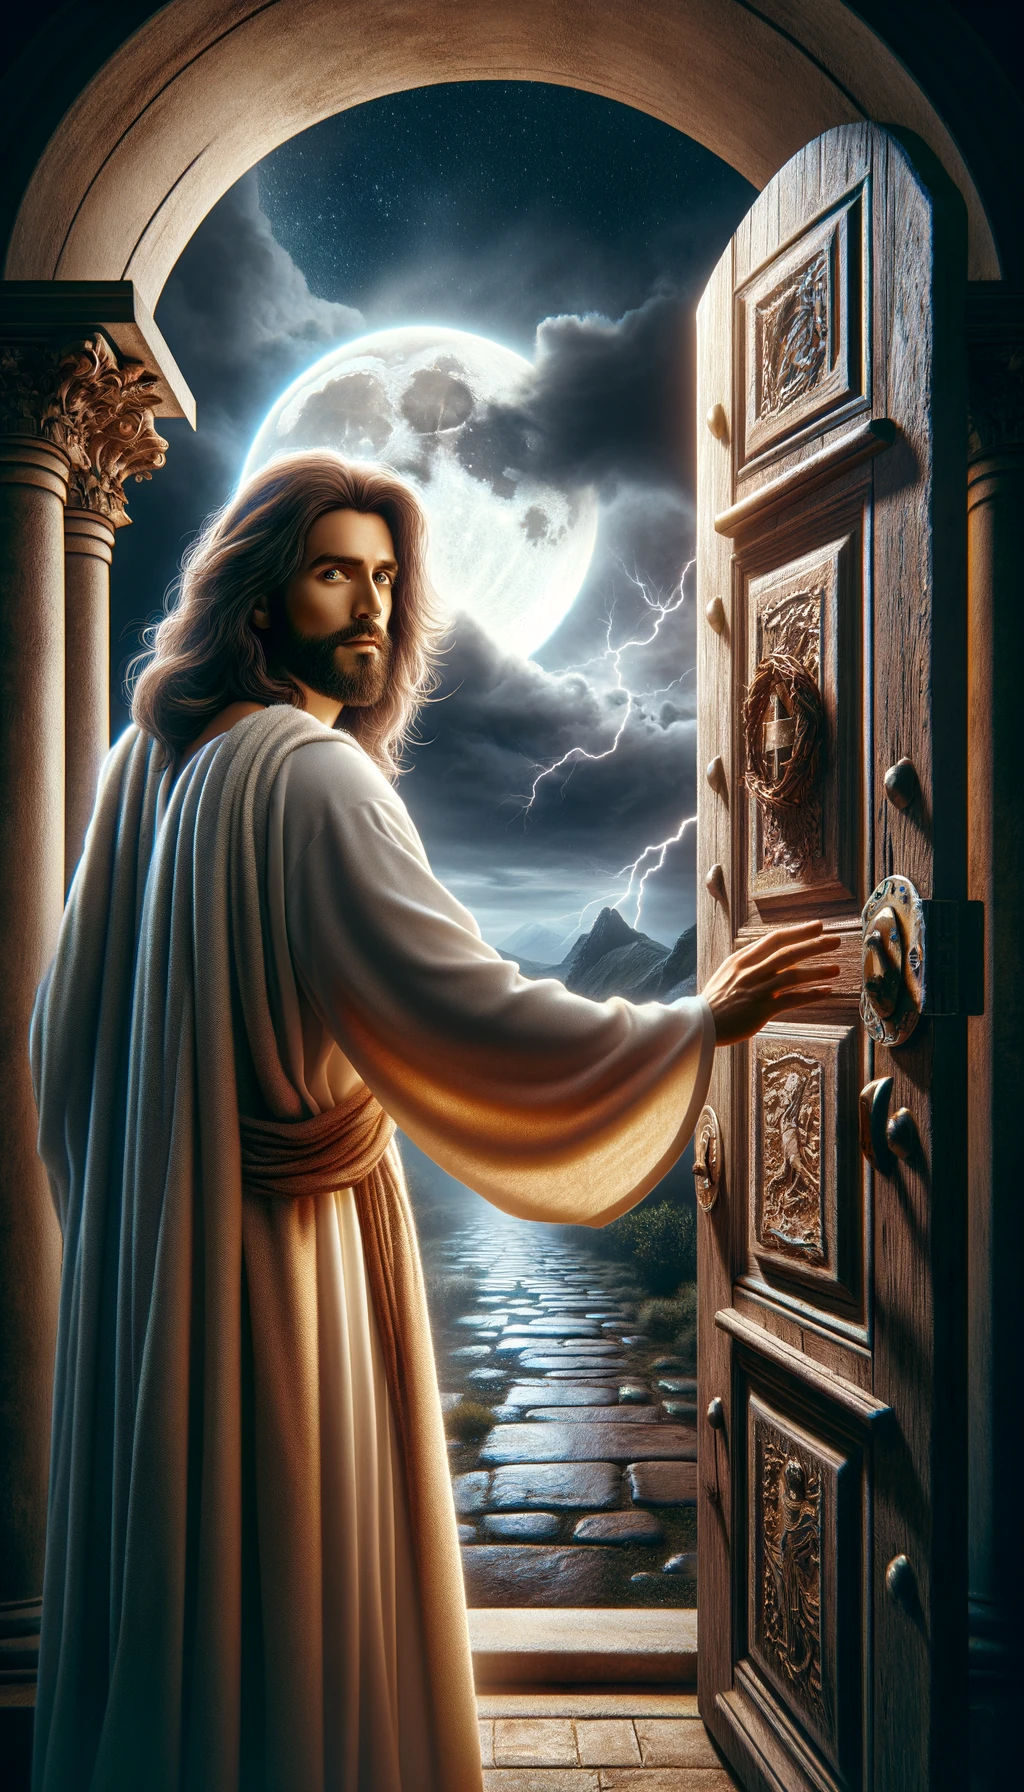 Christ knocking on our door